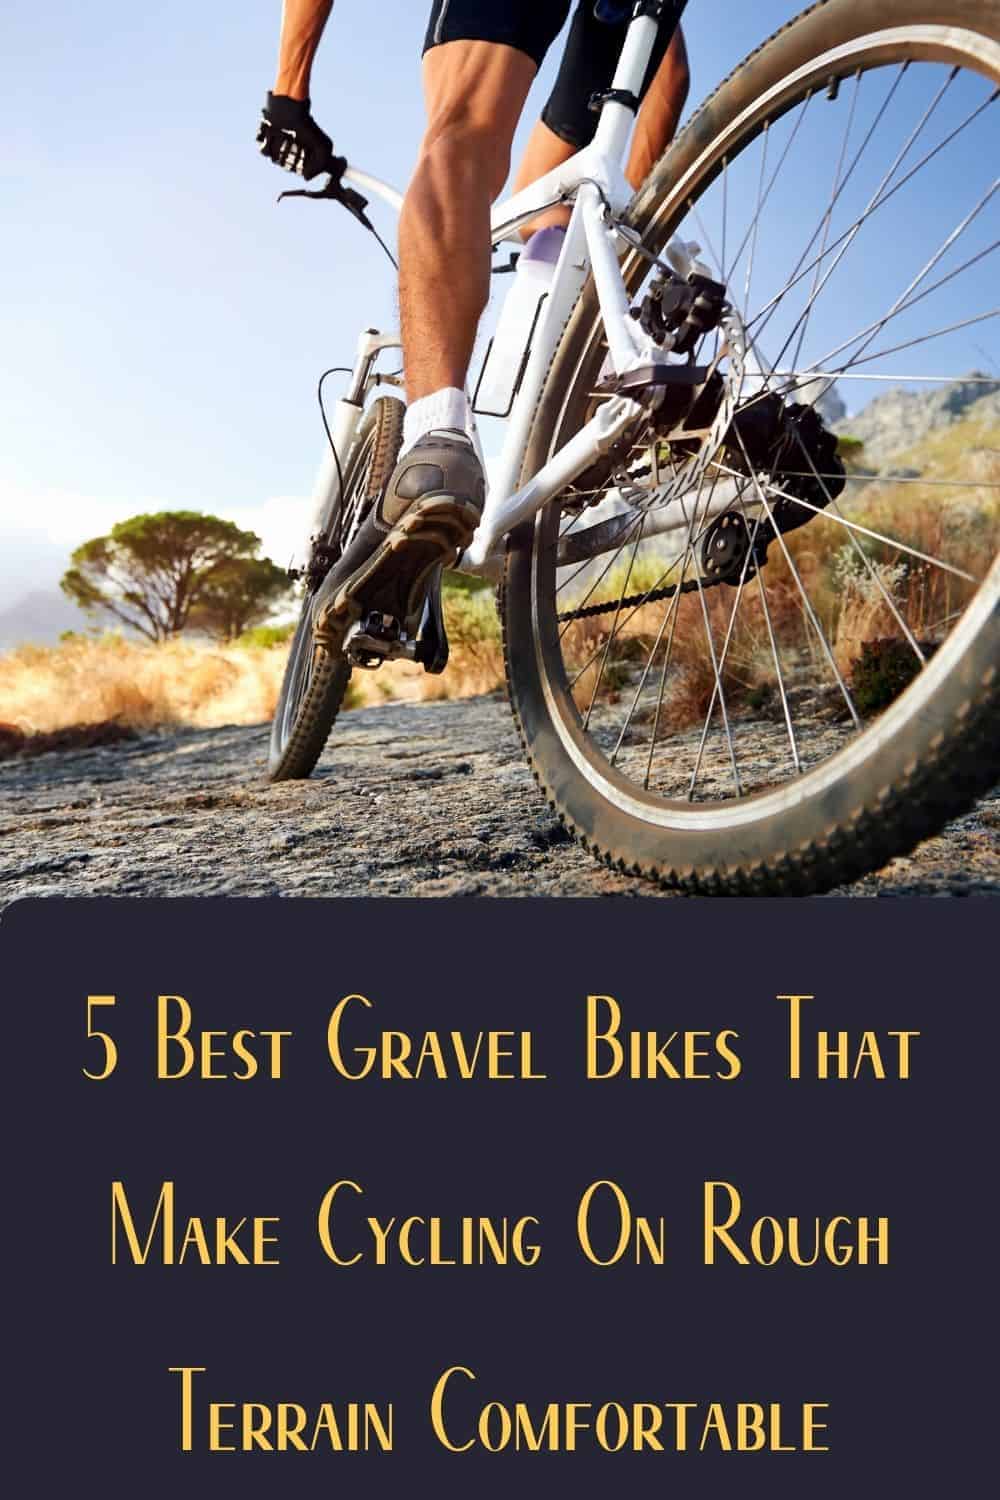 Pinterest image for 5 Best Gravel Bikes That Make Cycling On Rough Terrain Comfortable